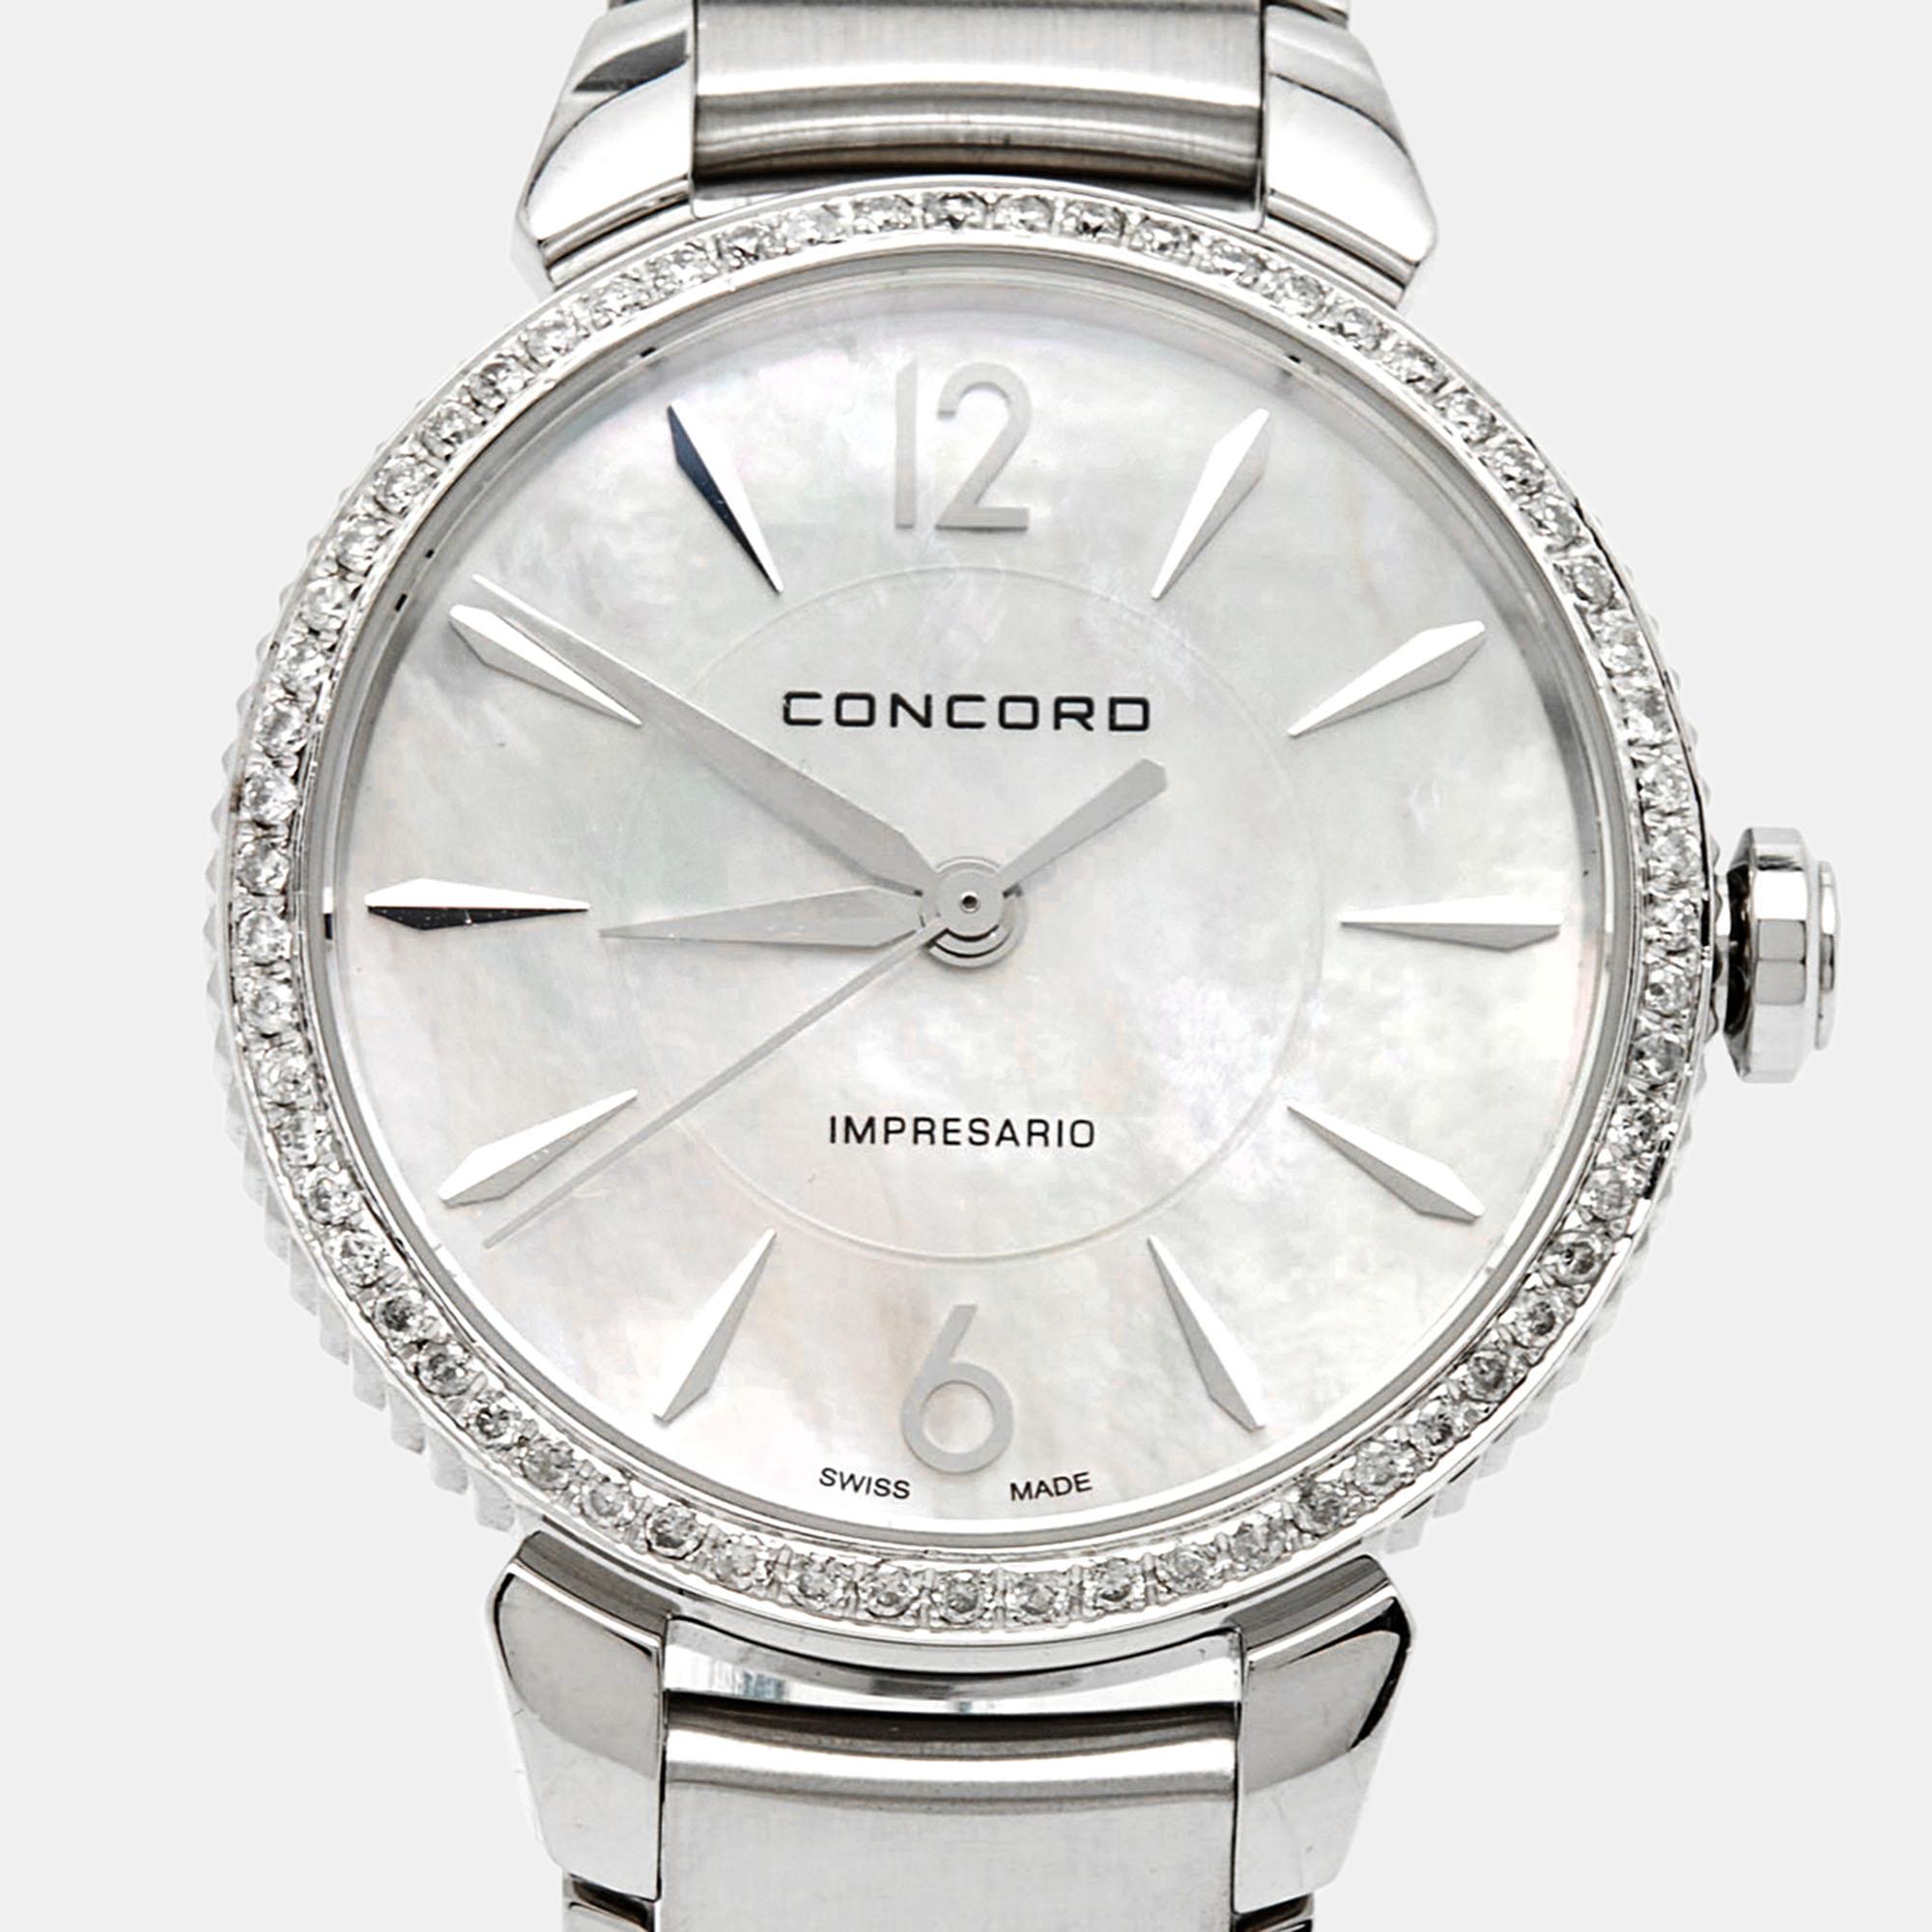 Add luxury to your collection with this gem of a timepiece by Concord. Known as the Impresario watch, it comes made using stainless steel. The Mother of Pearl dial within the case is set with steel hour markers and three hands. The bezel is decked